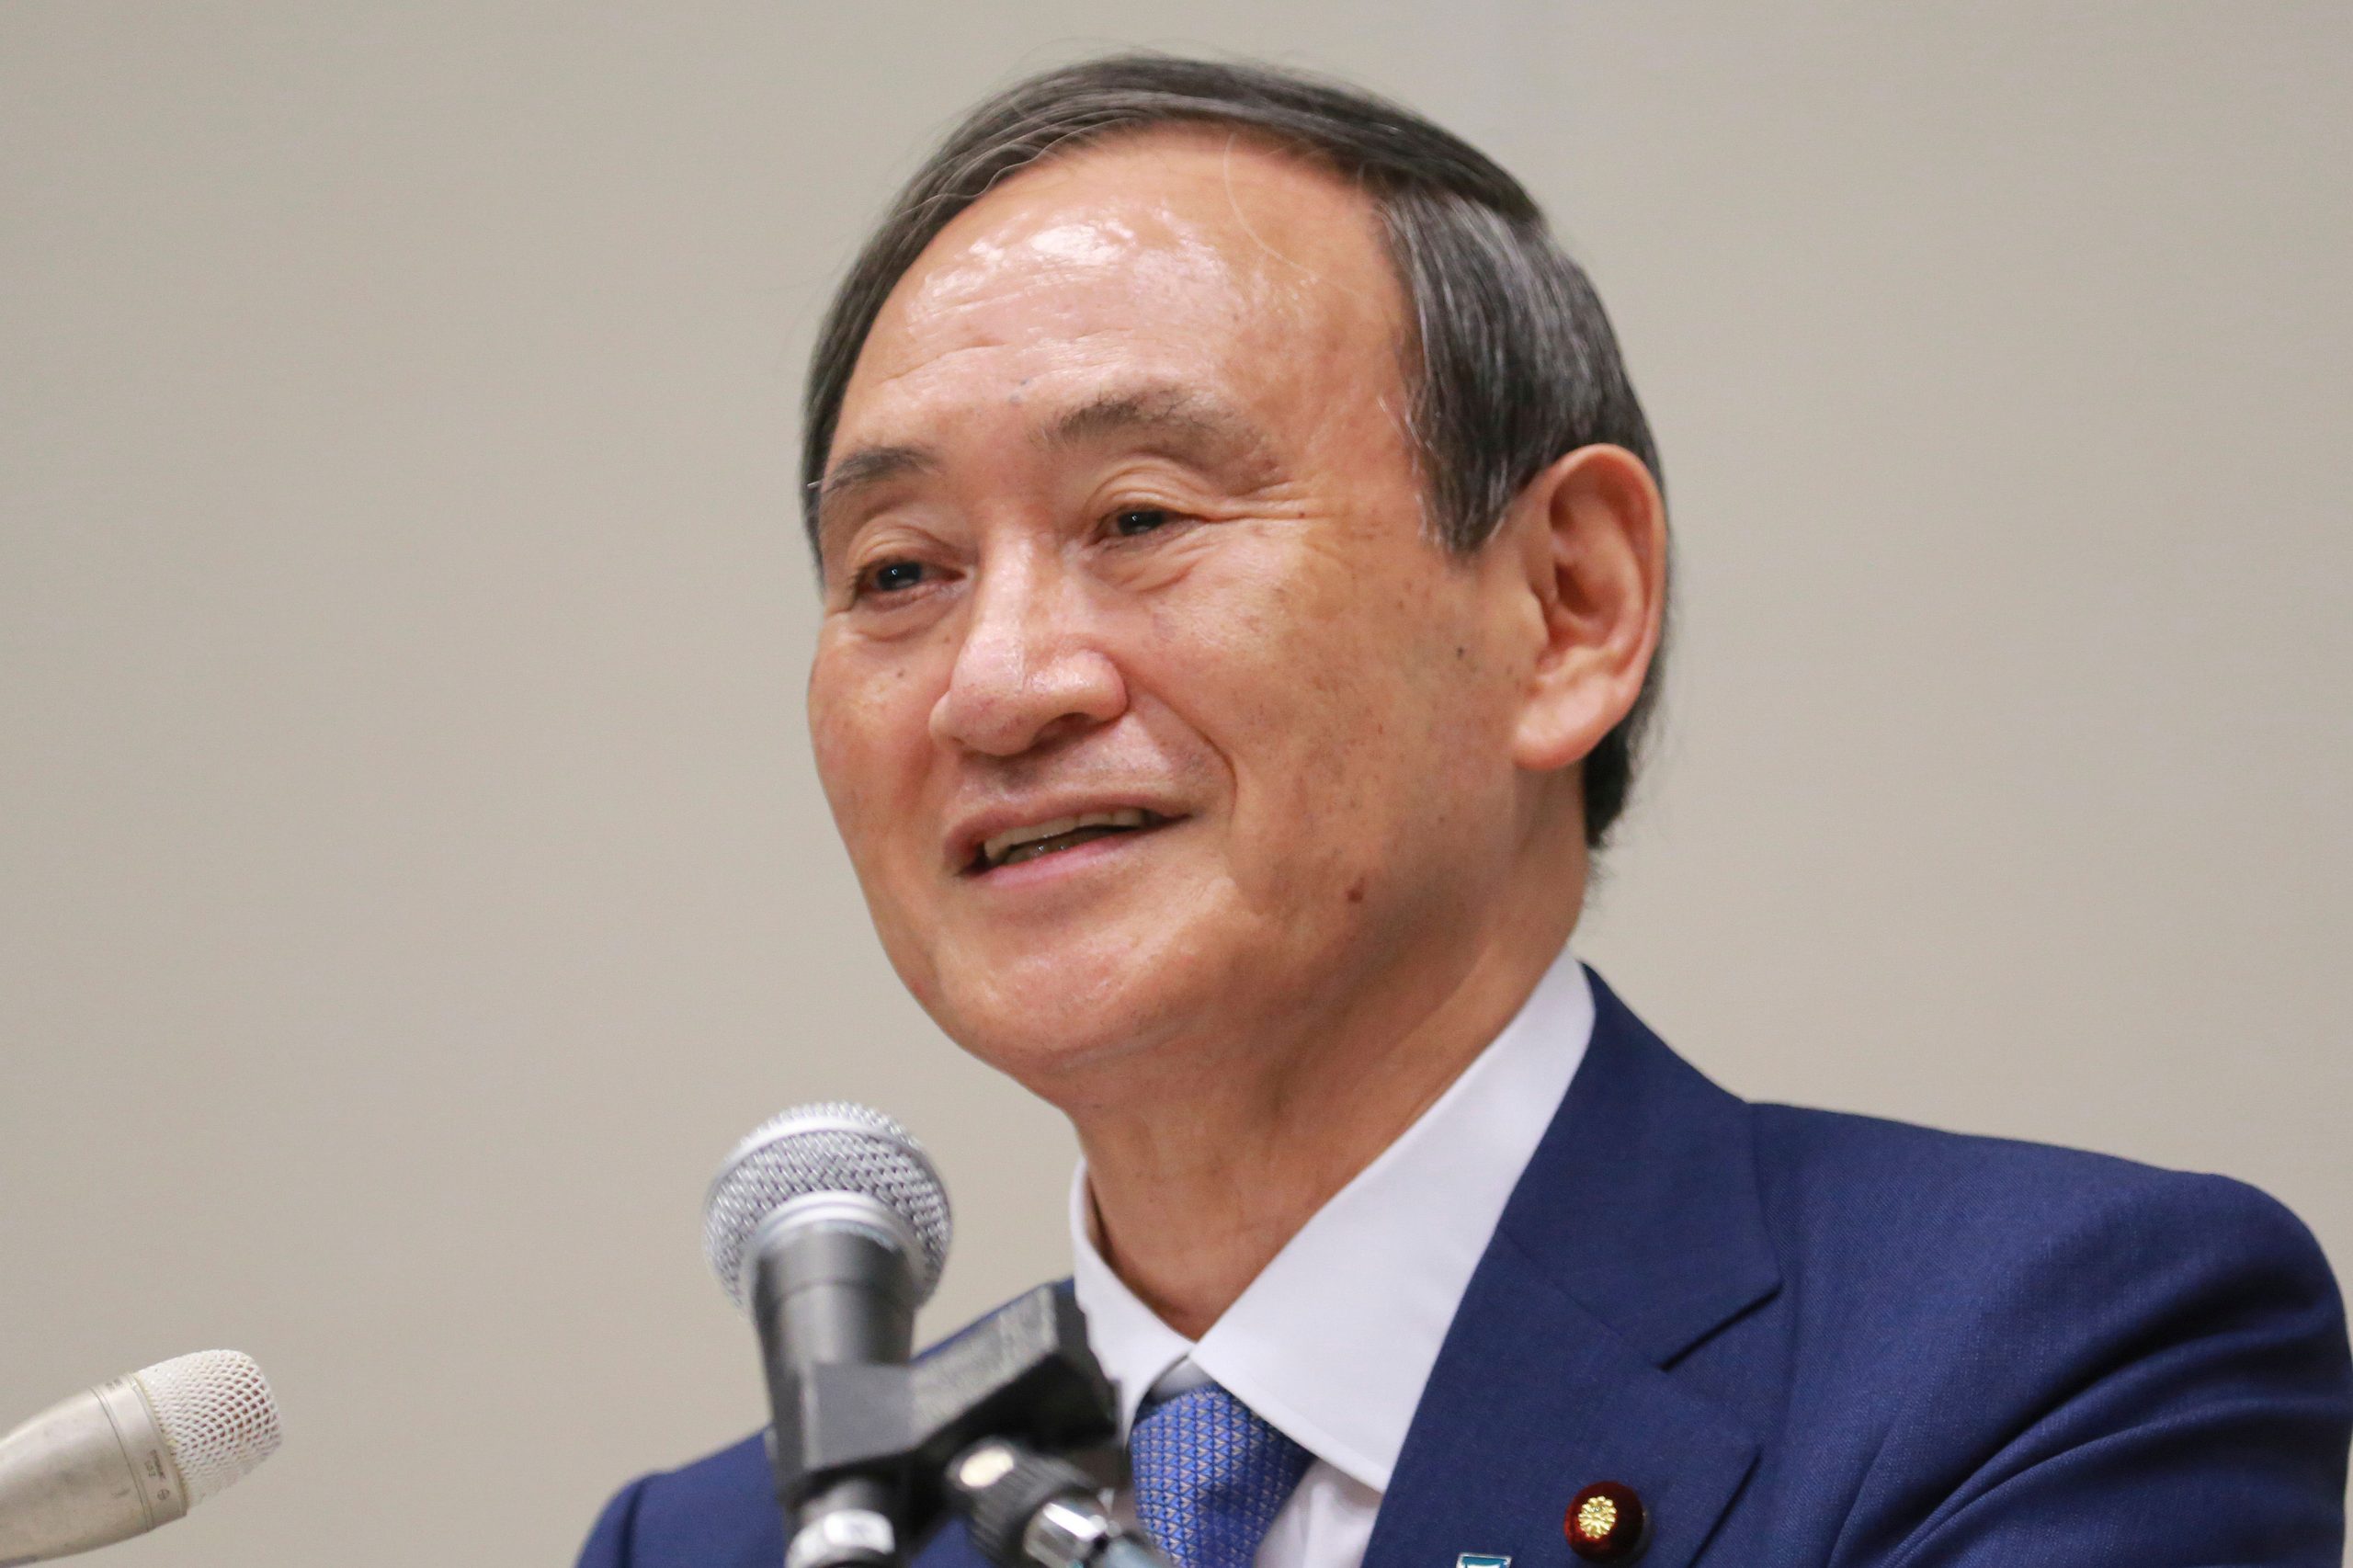 Yoshihide Suga: The man who is expected to replace Shinzo Abe as Japan PM